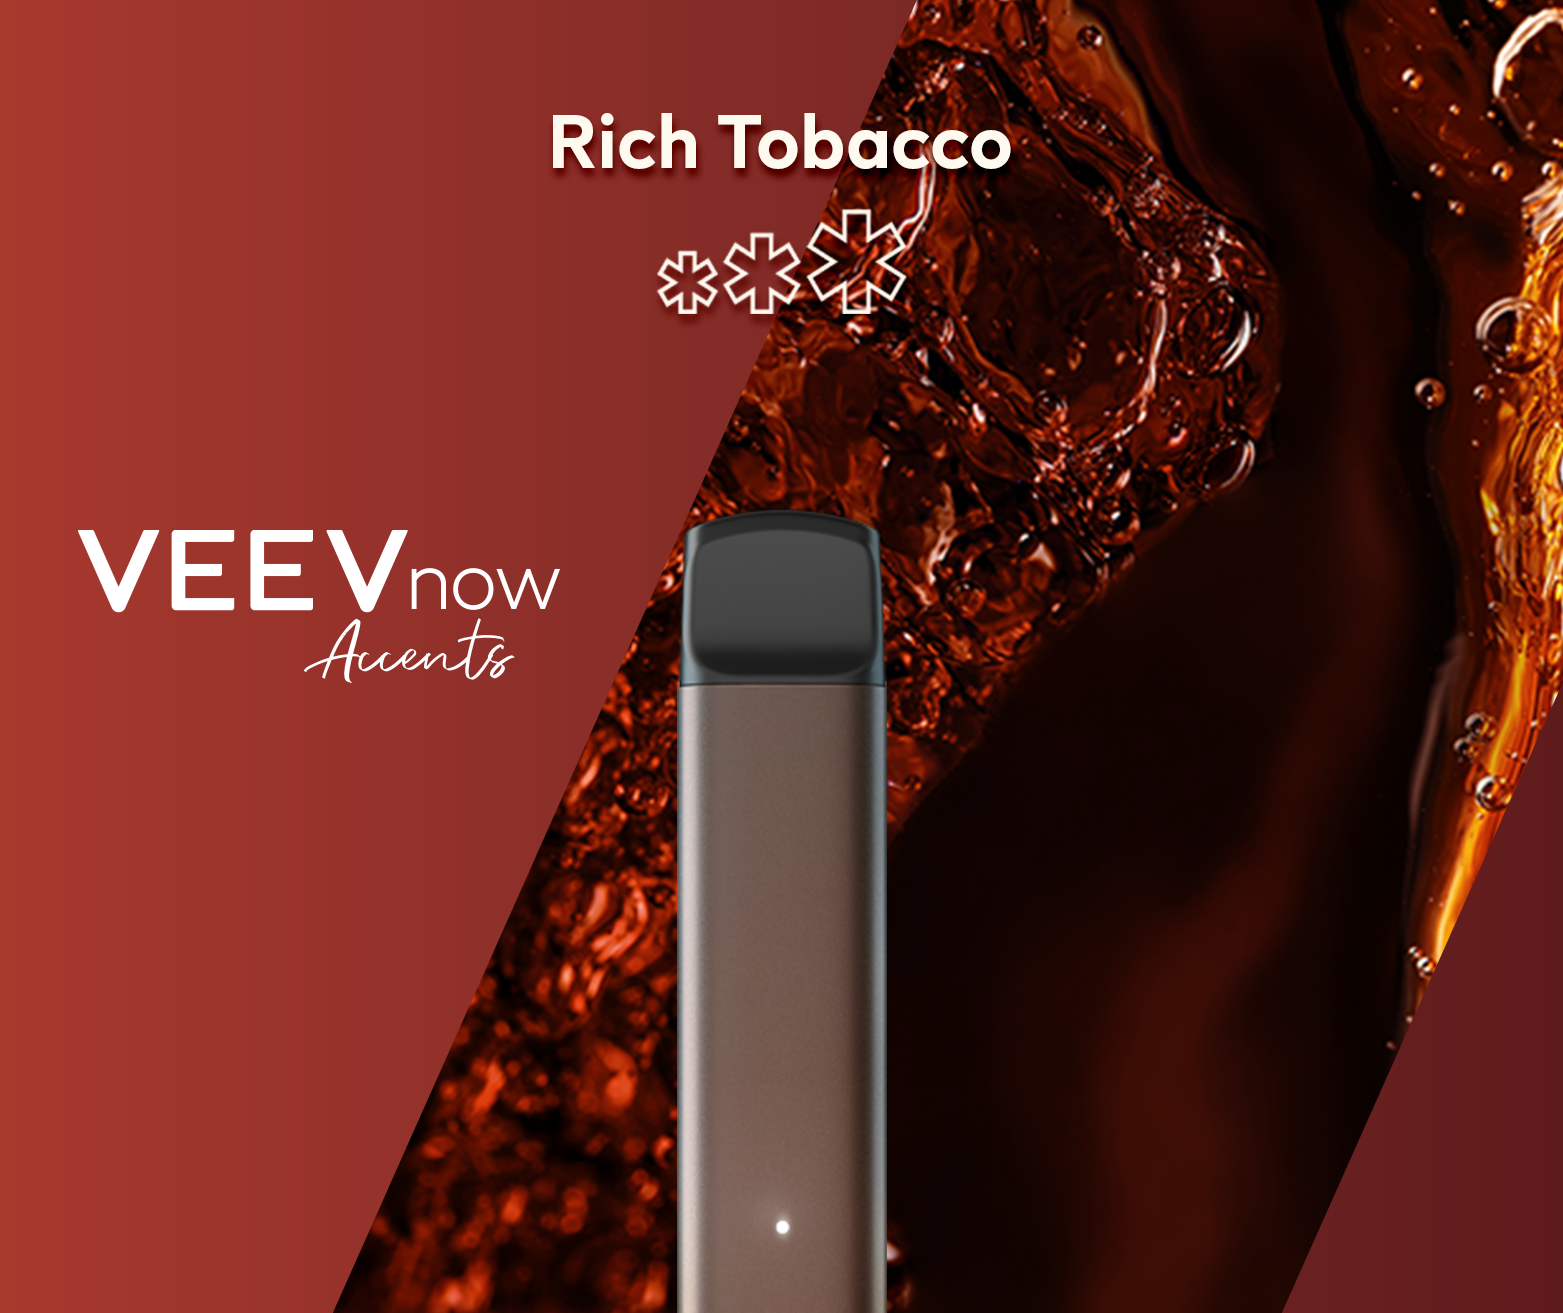 A VEEV NOW Disposable in Rich Tobacco Flavour